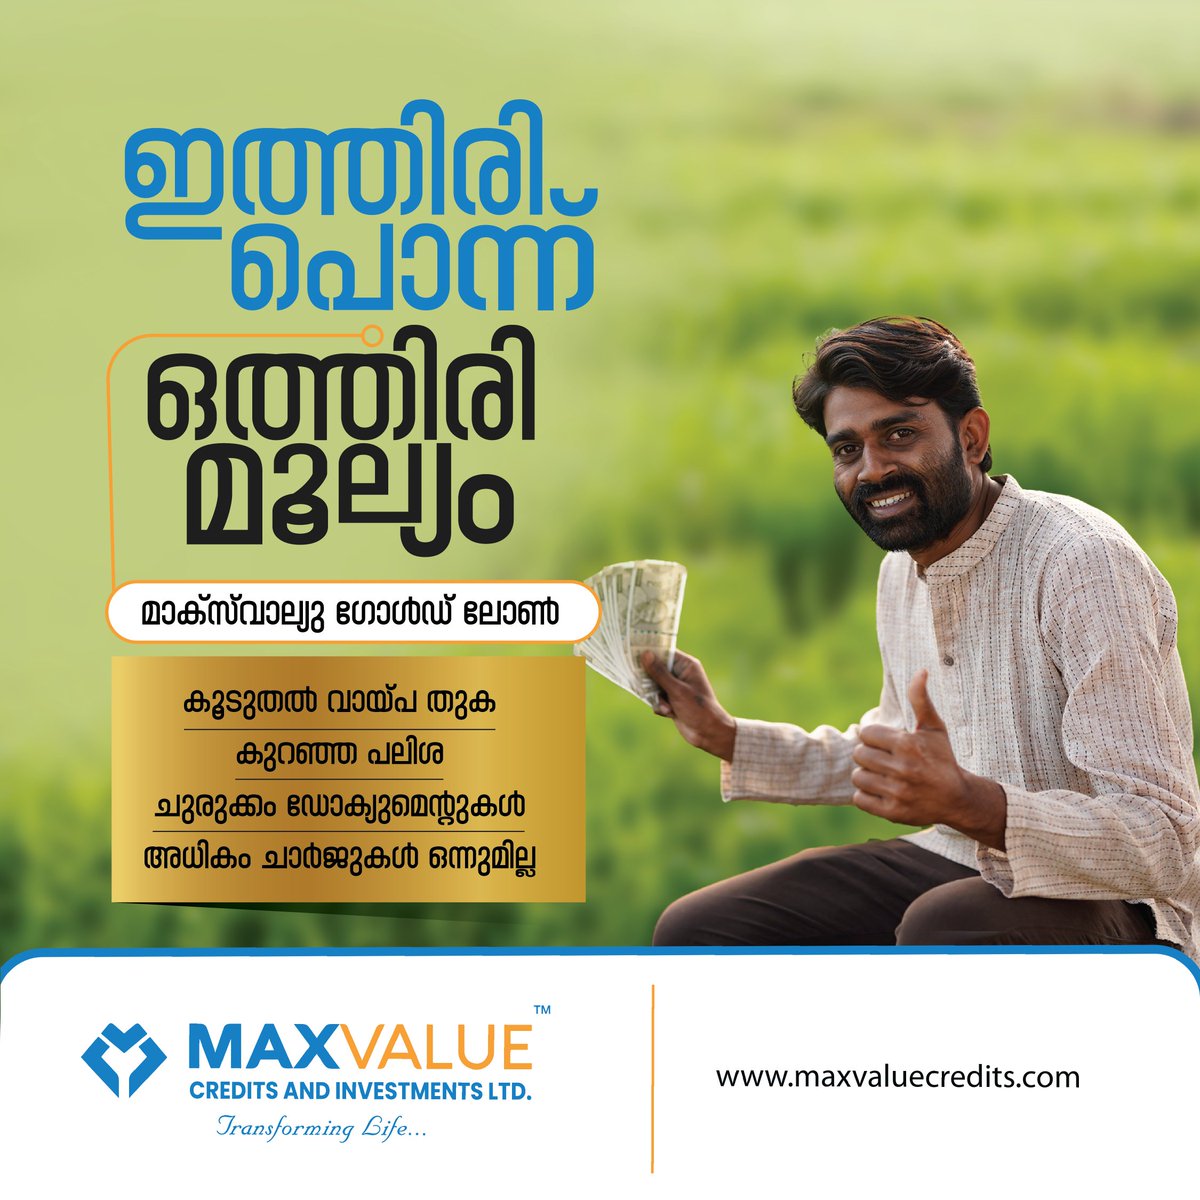 Unlock the hidden value of your gold assets with our hassle-free gold loan. 

🪙 Maxvalue Gold Loan 
🌐maxvaluecredits.com

#maxvalue #karnataka #kerala #andrapradesh #goldloans #microfinance #vehicleloan #money #trading #price #business #investment #stockmarket #wealth